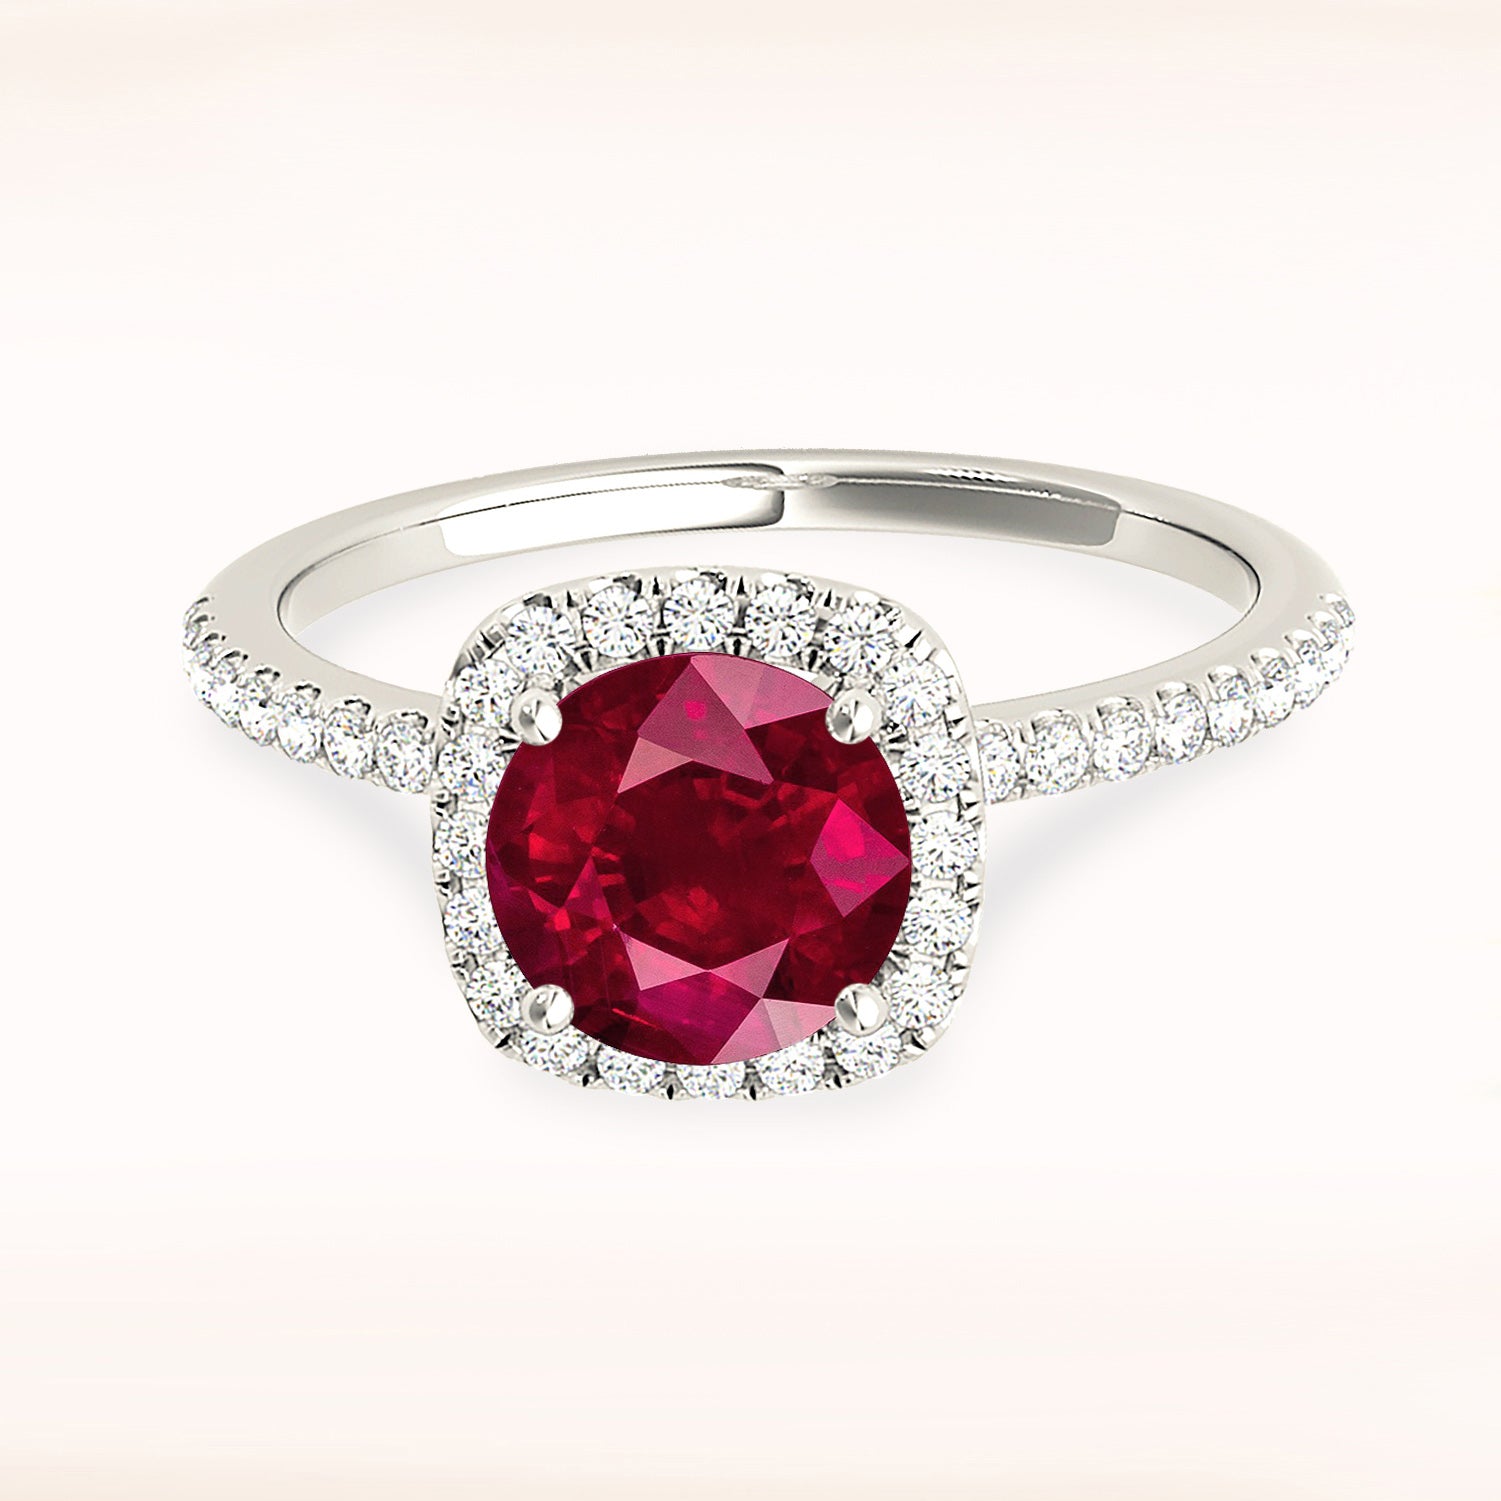 1.35 ct. Genuine Round Ruby Ring With 0.20 ctw. Diamond Cushion Halo, Delicate Diamond Band | Round Ruby Halo Ring | Natural Ruby Ring-in 14K/18K White, Yellow, Rose Gold and Platinum - Christmas Jewelry Gift -VIRABYANI